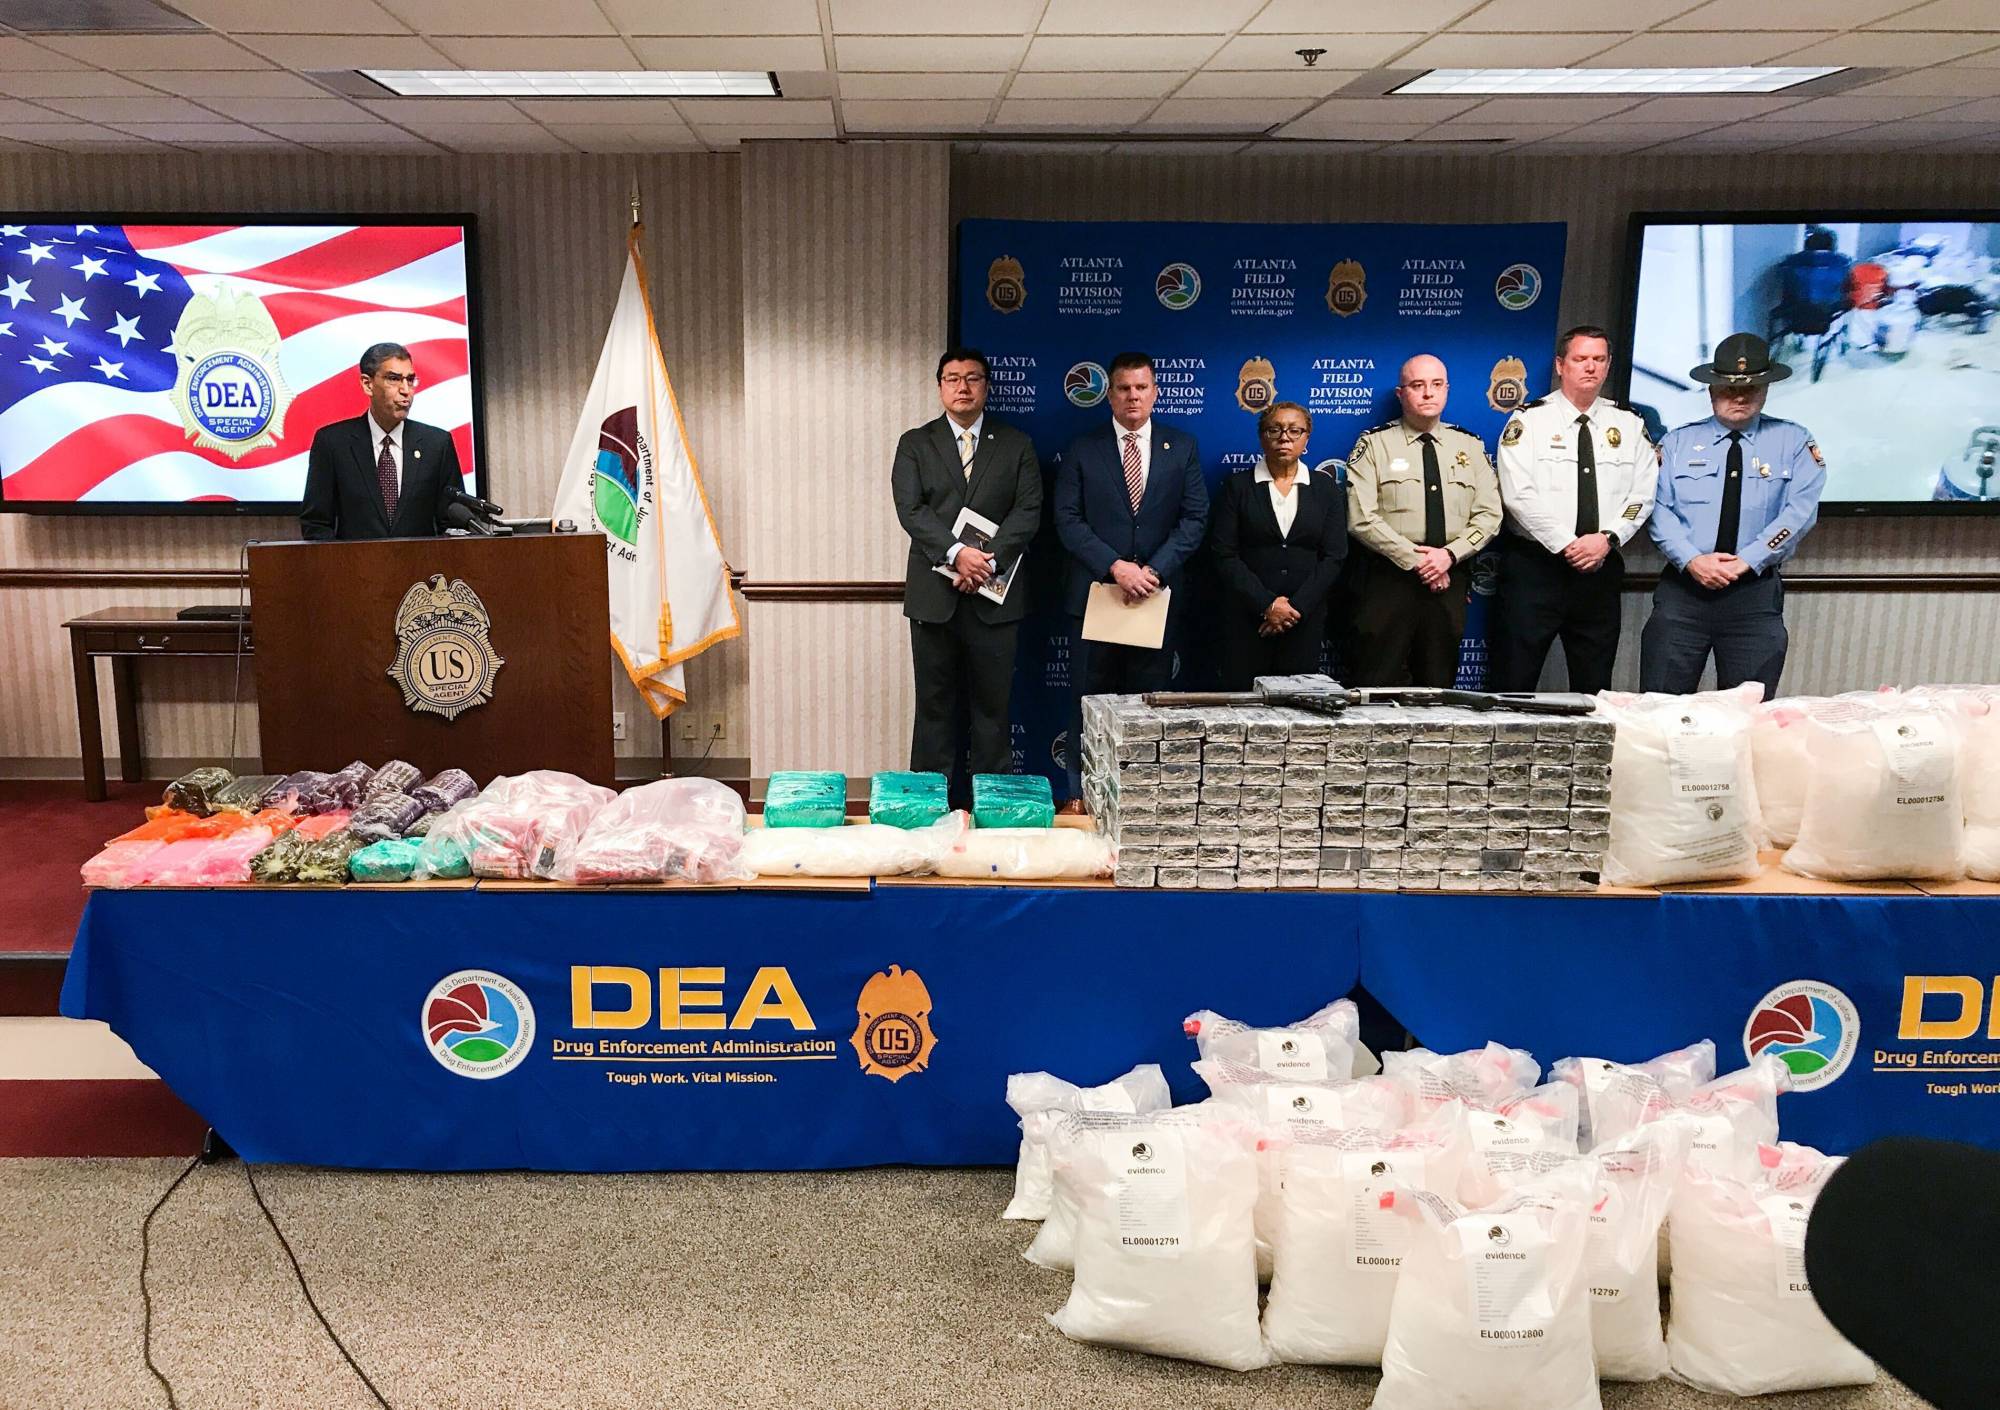 U.S. Drug Enforcement Administration Acting Administrator Uttam Dhillon announced the launch of Operation Crystal Shield at a news conference in Atlanta on Thursday, Feb. 20, 2020. Federal authorities say they are targeting methamphetamine 